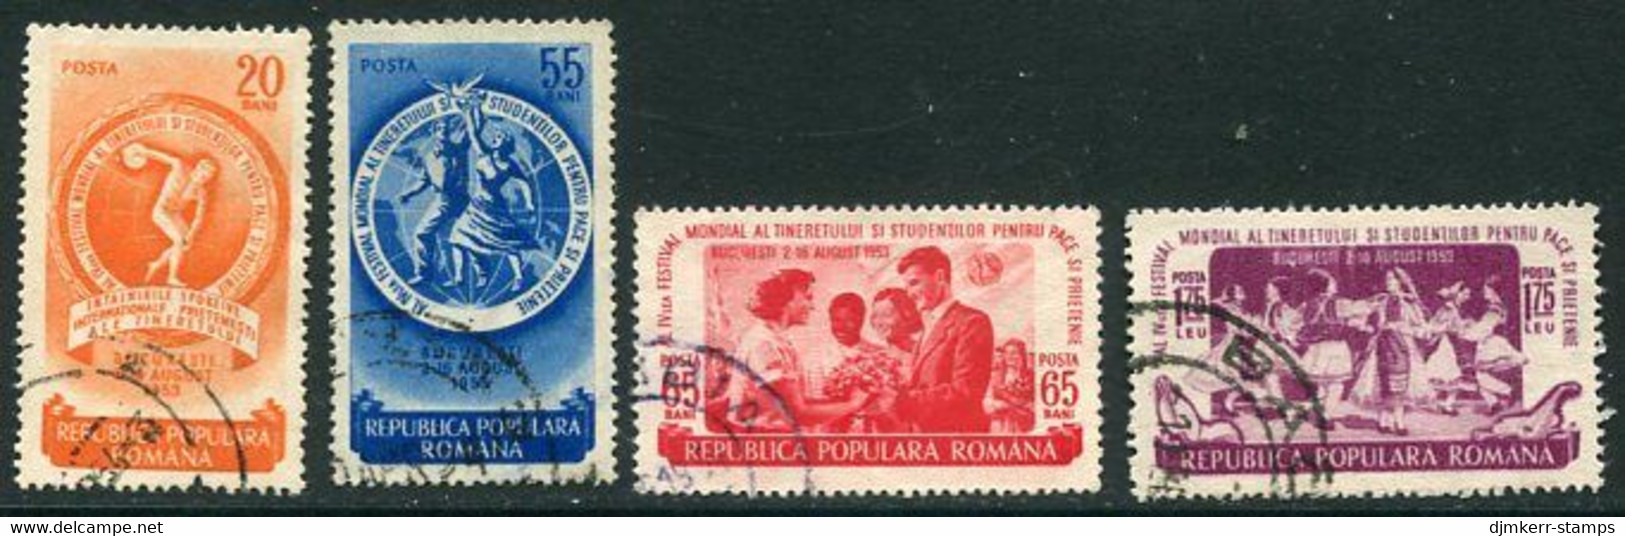 ROMANIA 1953 Youth And Student Festival  Used.  Michel 1435-38 - Usado